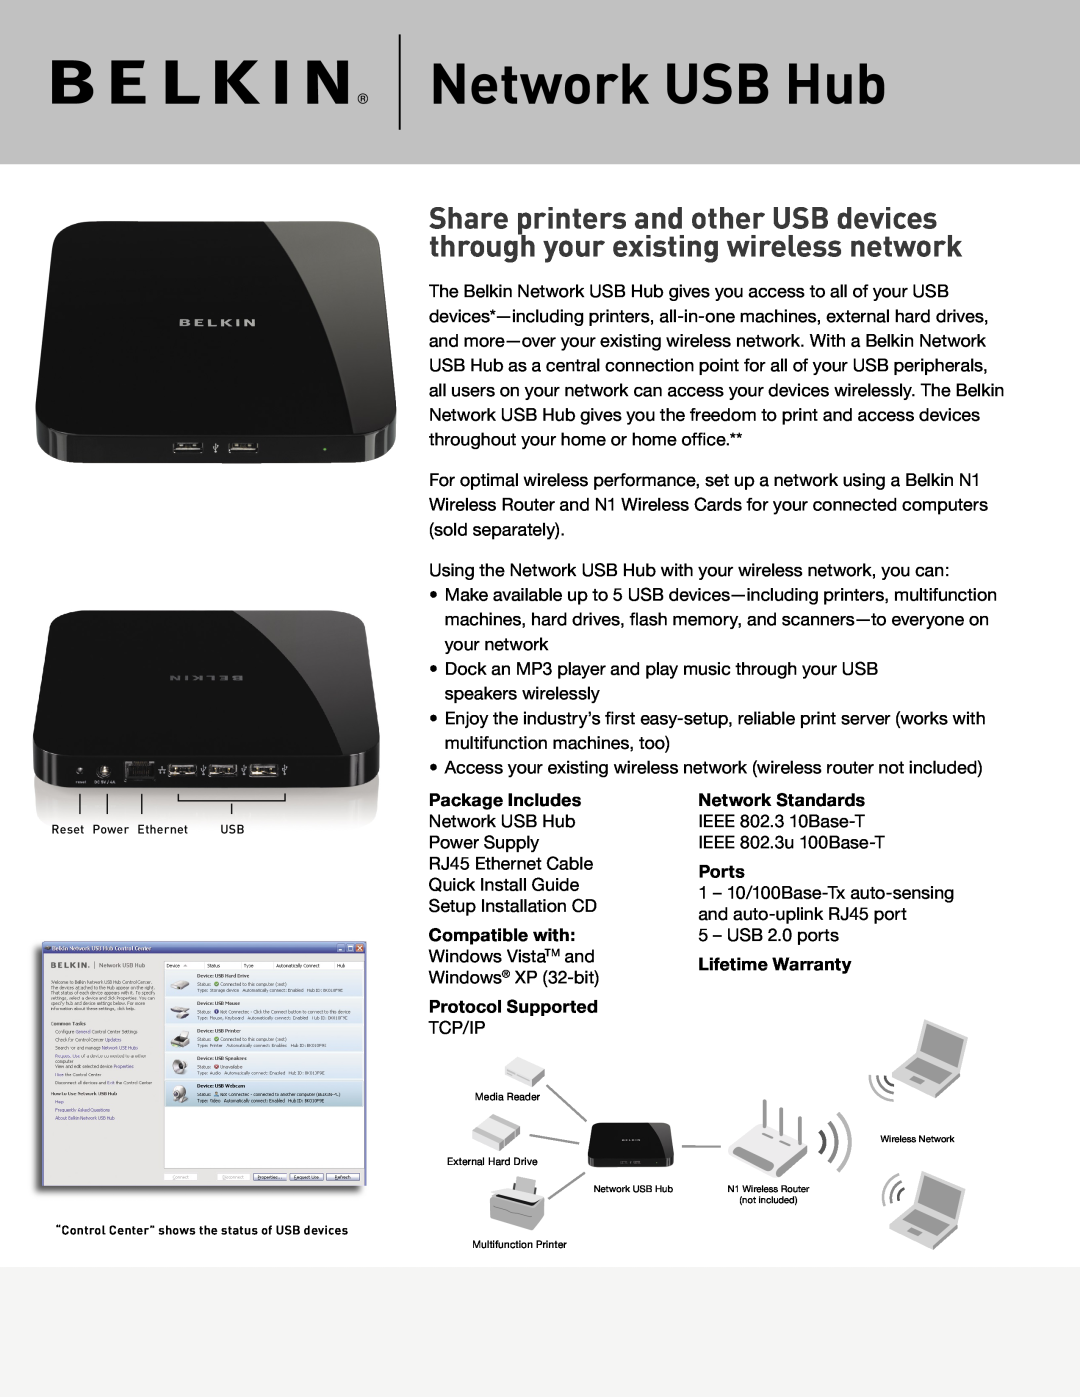 Belkin warranty Network USB Hub, Package Includes, Compatible with, Protocol Supported, Network Standards, Ports 